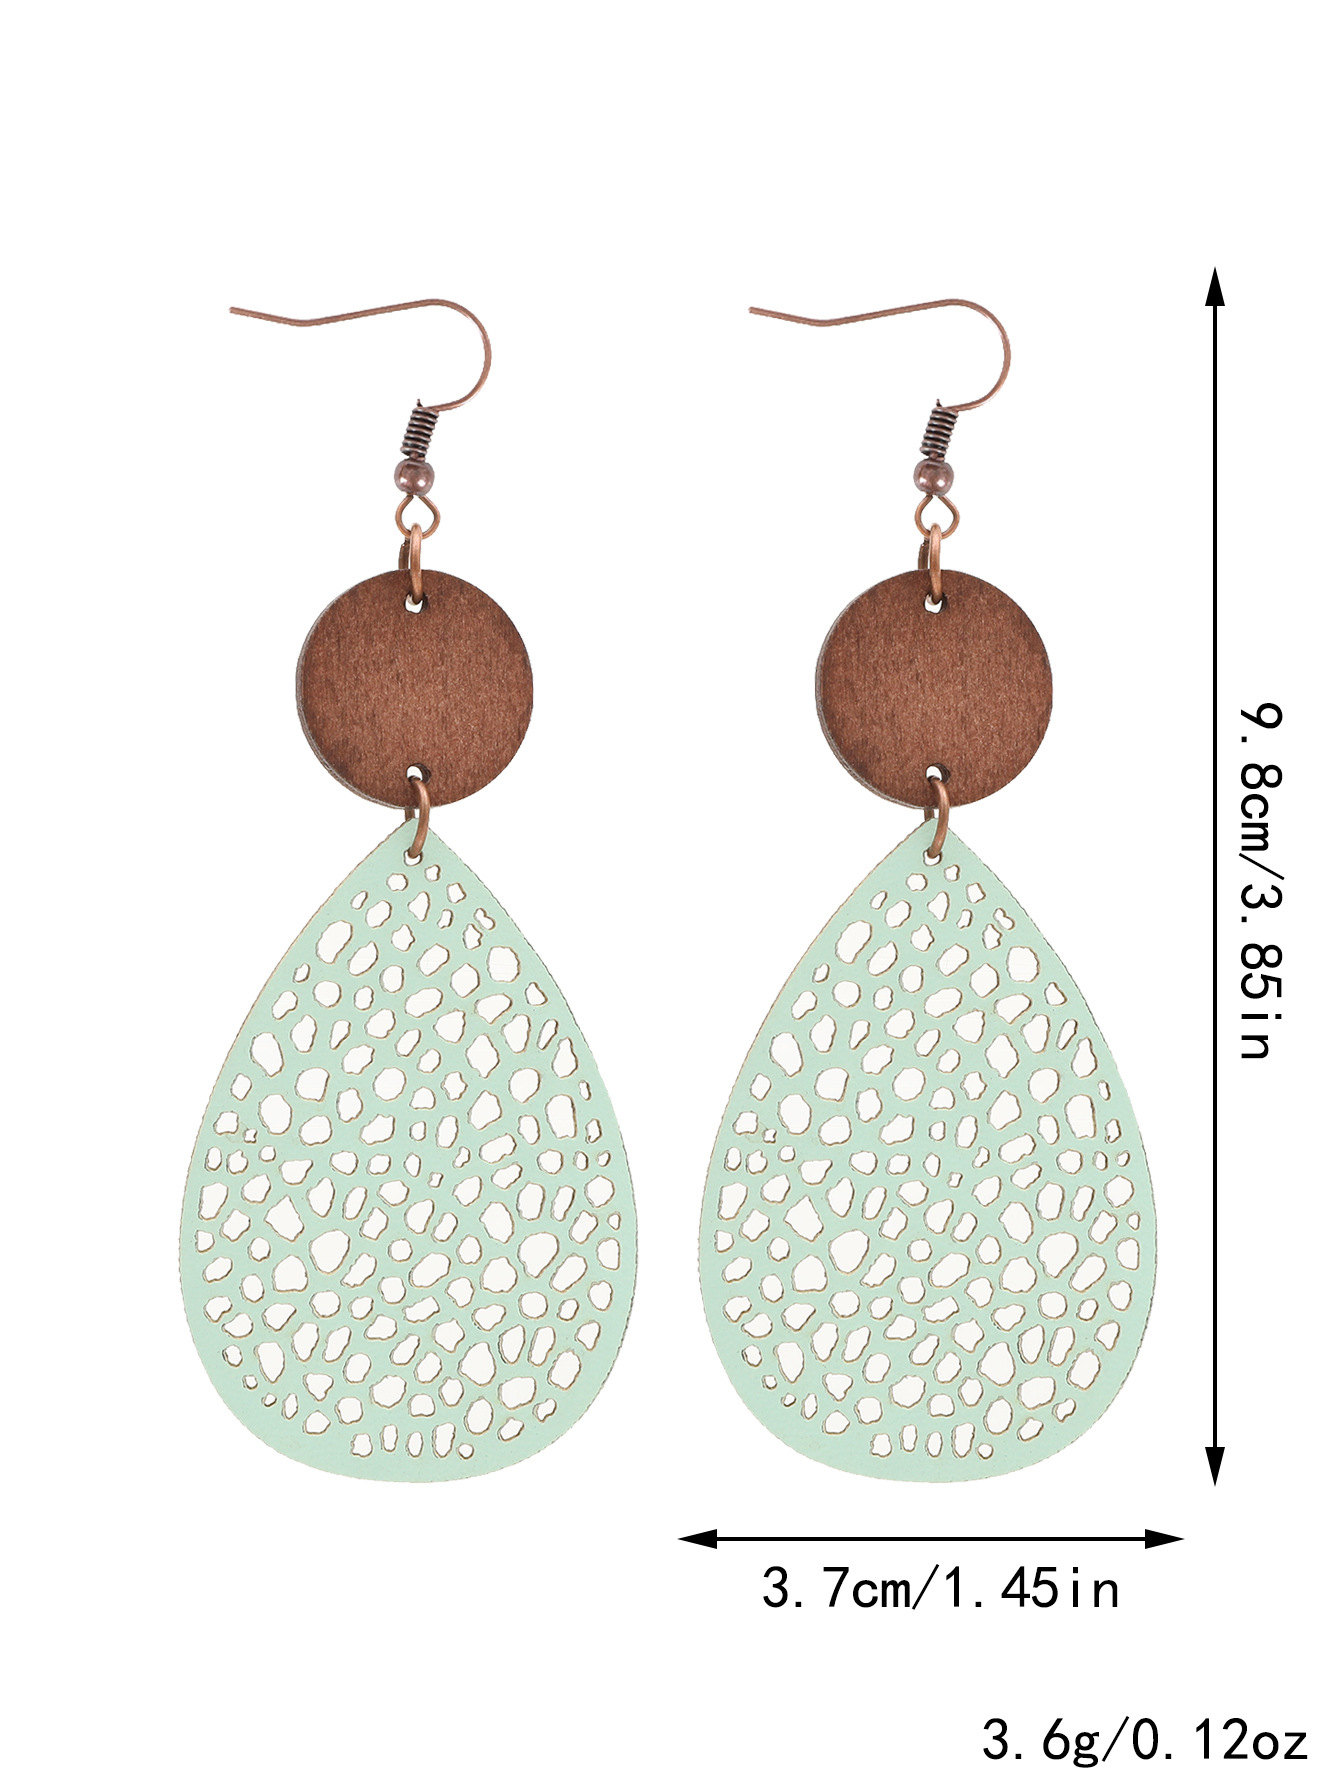 Drop-Shaped Hollow Leather Wood Piece Combination Mesh Earring Pendant for Ladies Earrings Cross-Border European and American Amazon AliExpress